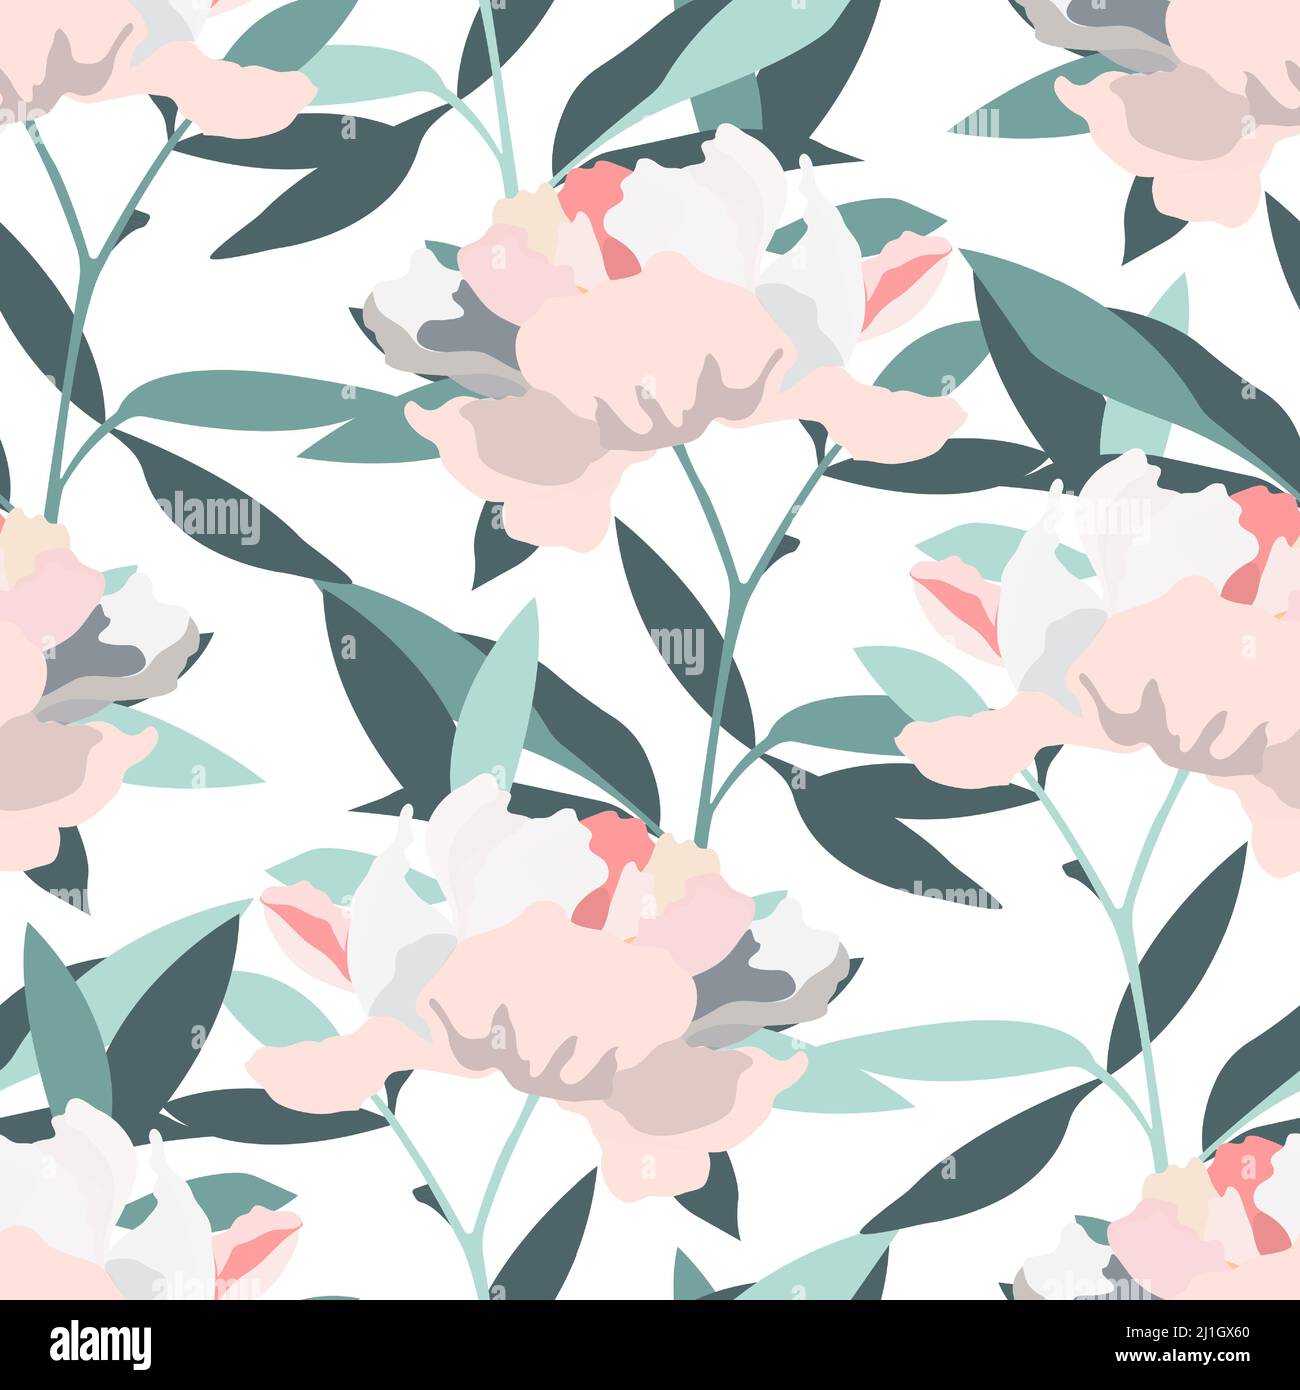 Vector floral seamless pattern. Pale pink peonies, green foliage on a white background.  Stock Vector